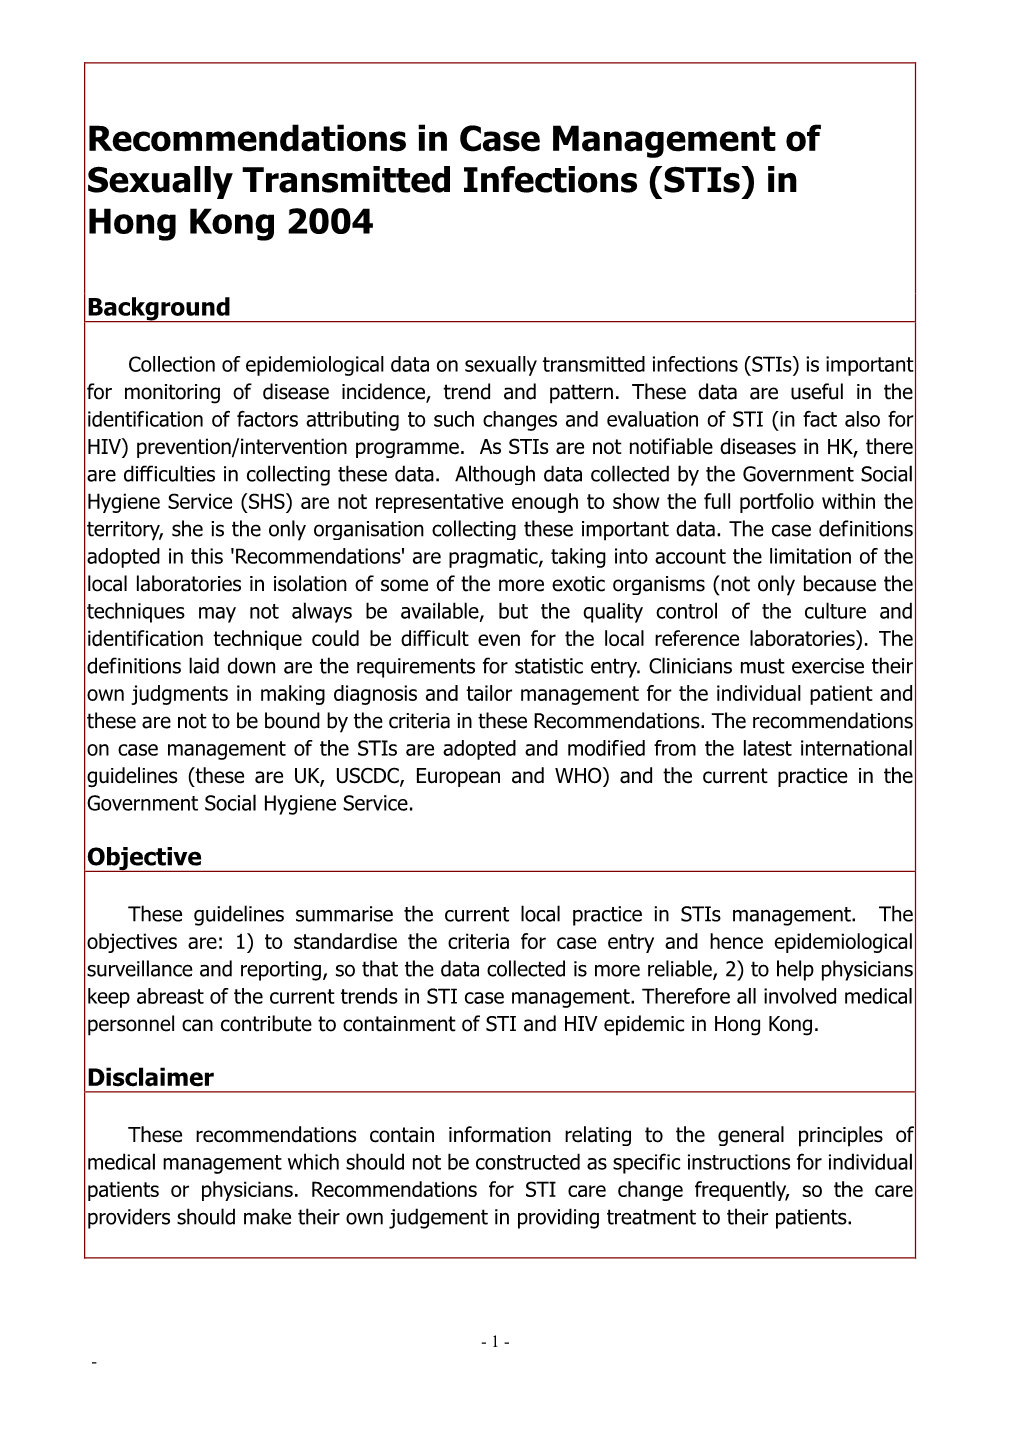 Recommendations in Case Management of Sexually Transmitted Infections (Stis) in Hong Kong 2004